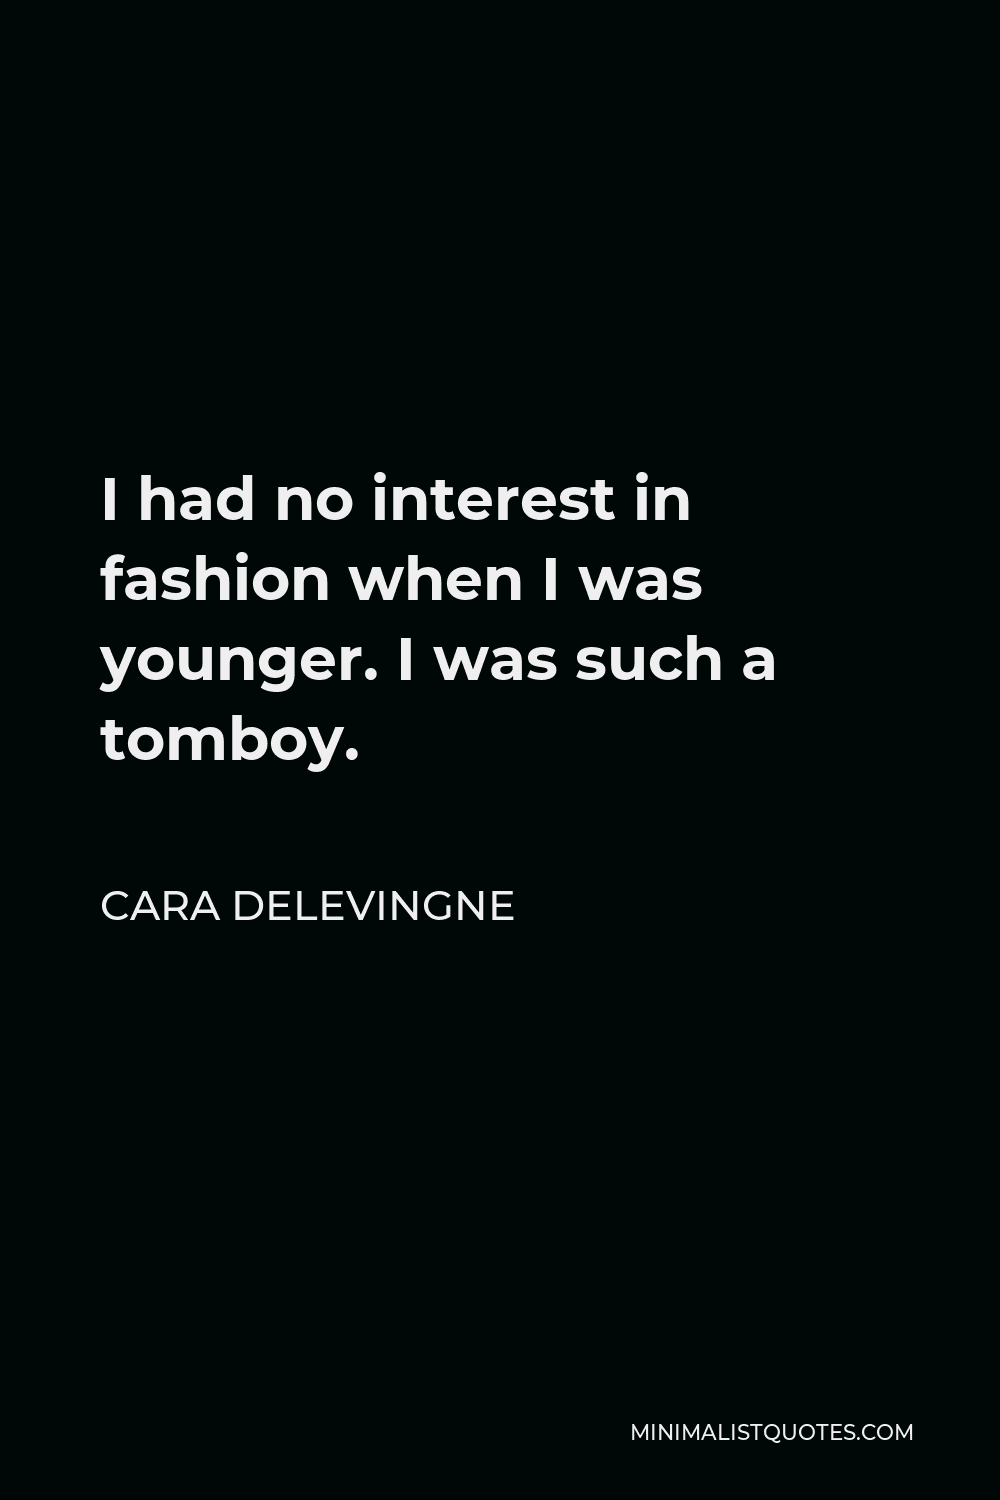 Cara Delevingne Quote - I had no interest in fashion when I was younger. I was such a tomboy. I loved soccer, as you call it, or sports in general. The first time I was a bridesmaid, to my auntie, I refused to go down the aisle without my football shorts underneath my dress.